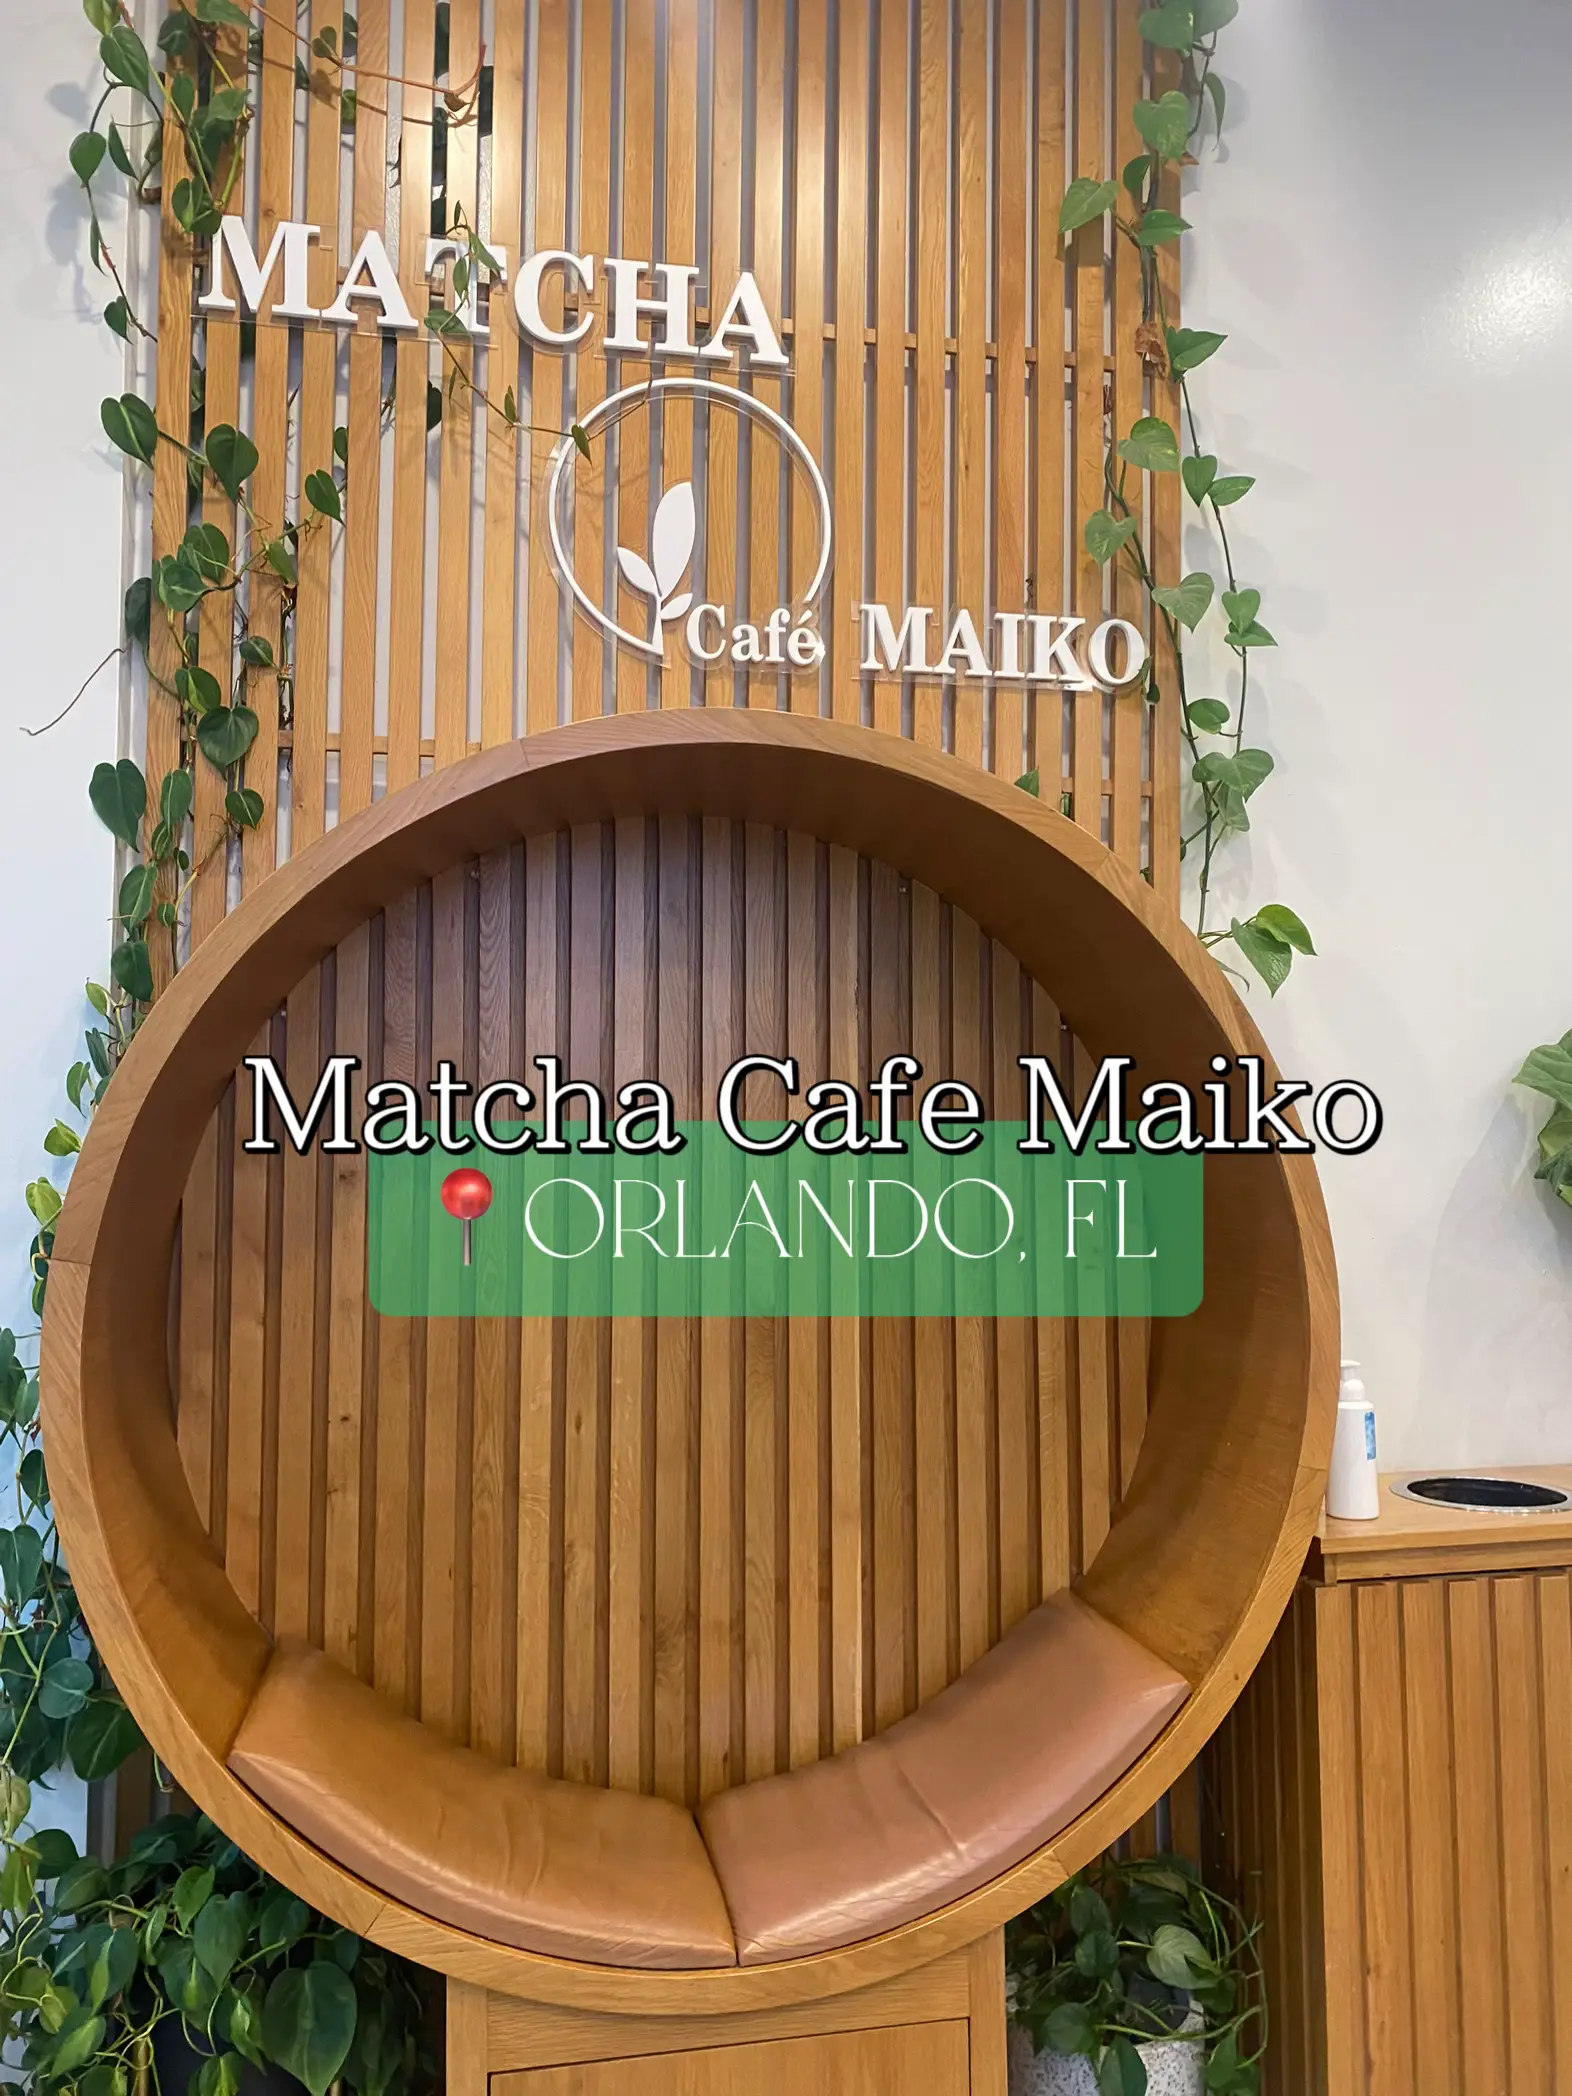 Matcha Cafe Maiko in📍Orlando, FL's images